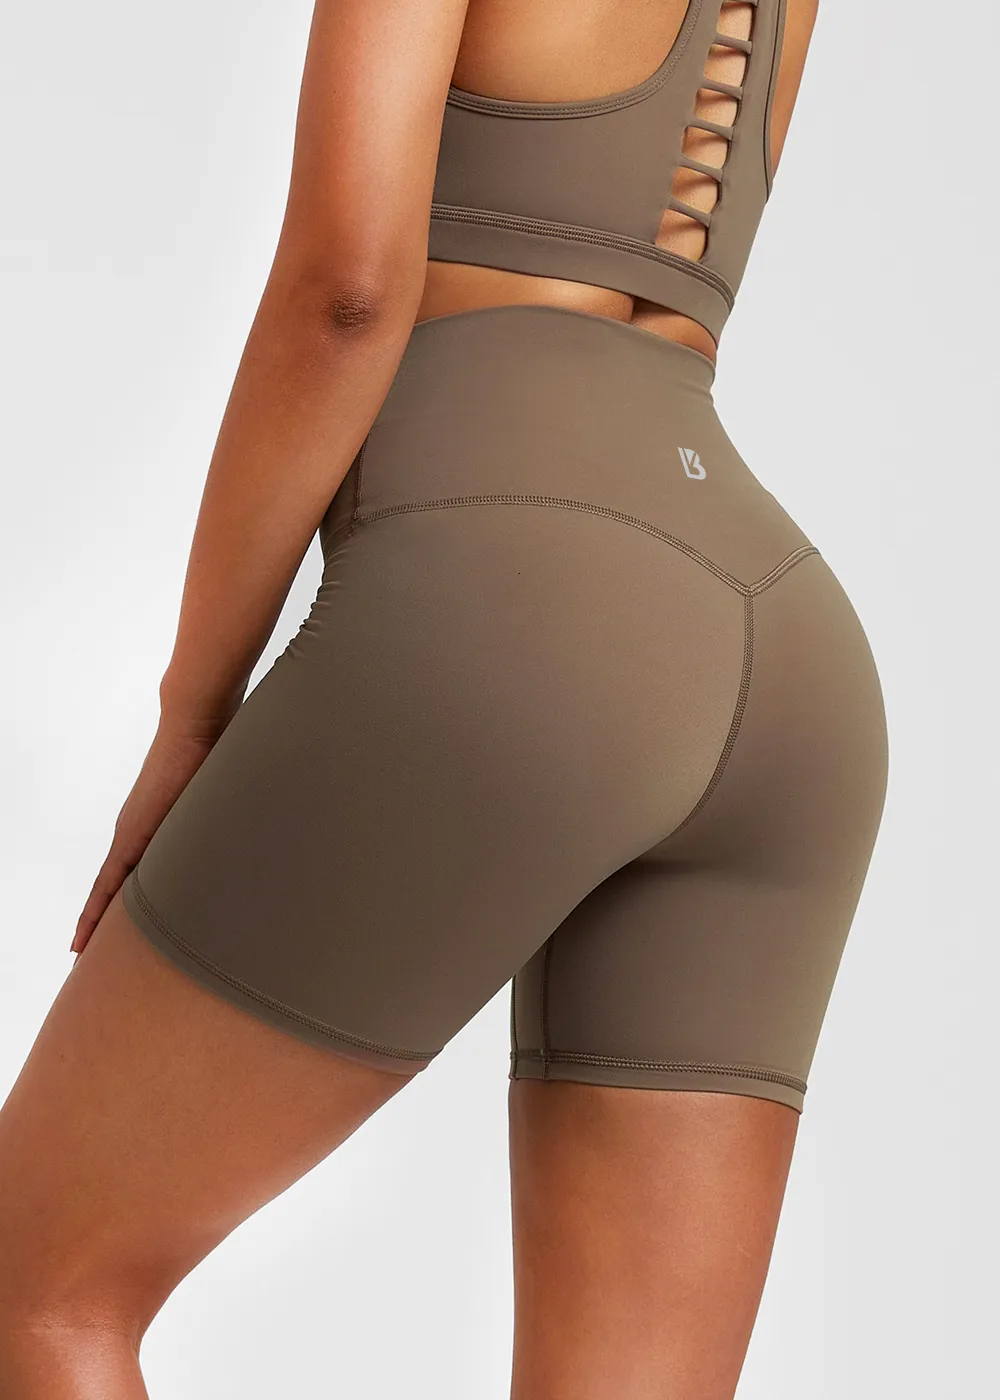 Buffbunny Collection Seamless Yoga Shorts For Women High Quality Gym  Workout Pants With Bunny Butt And Gym Legging For Fitness And Yoga Workout  Clothes Set 230613 From Wai05, $16.27